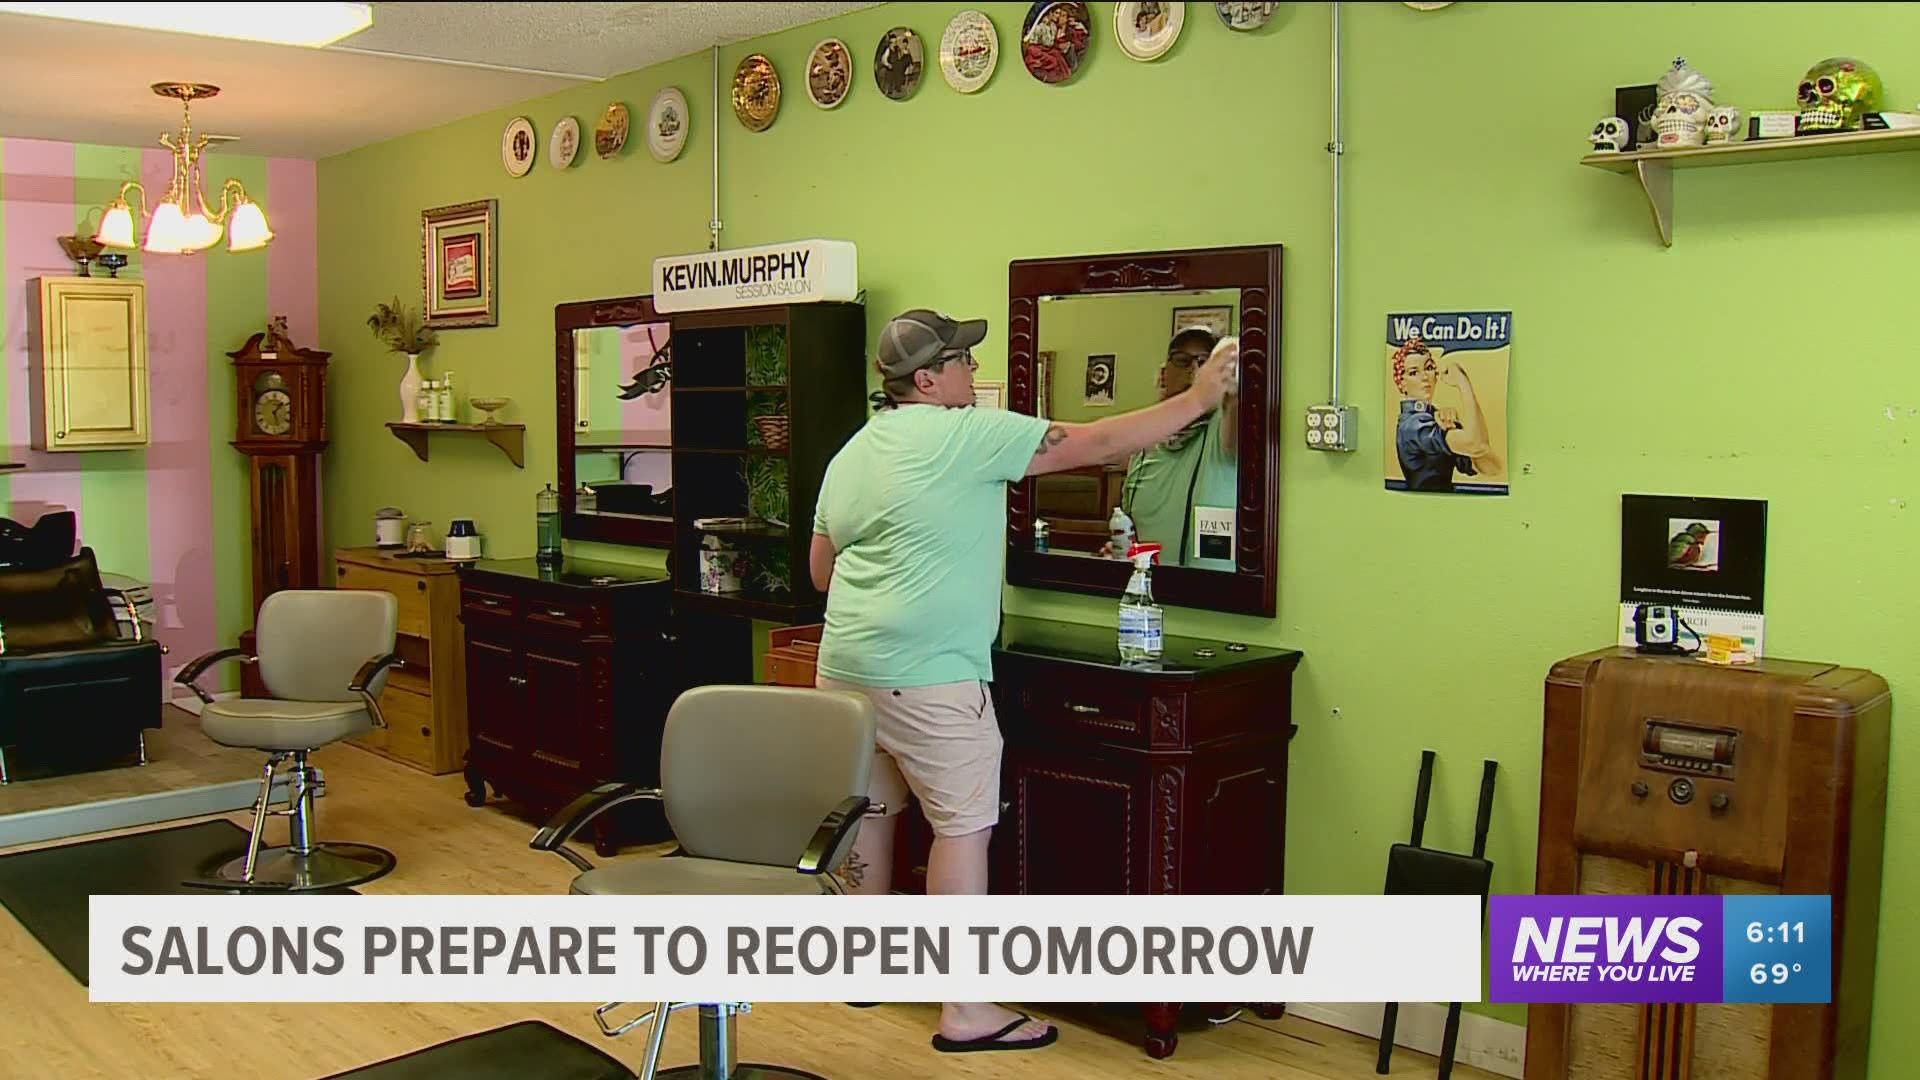 Salons prepare to reopen tomorrow